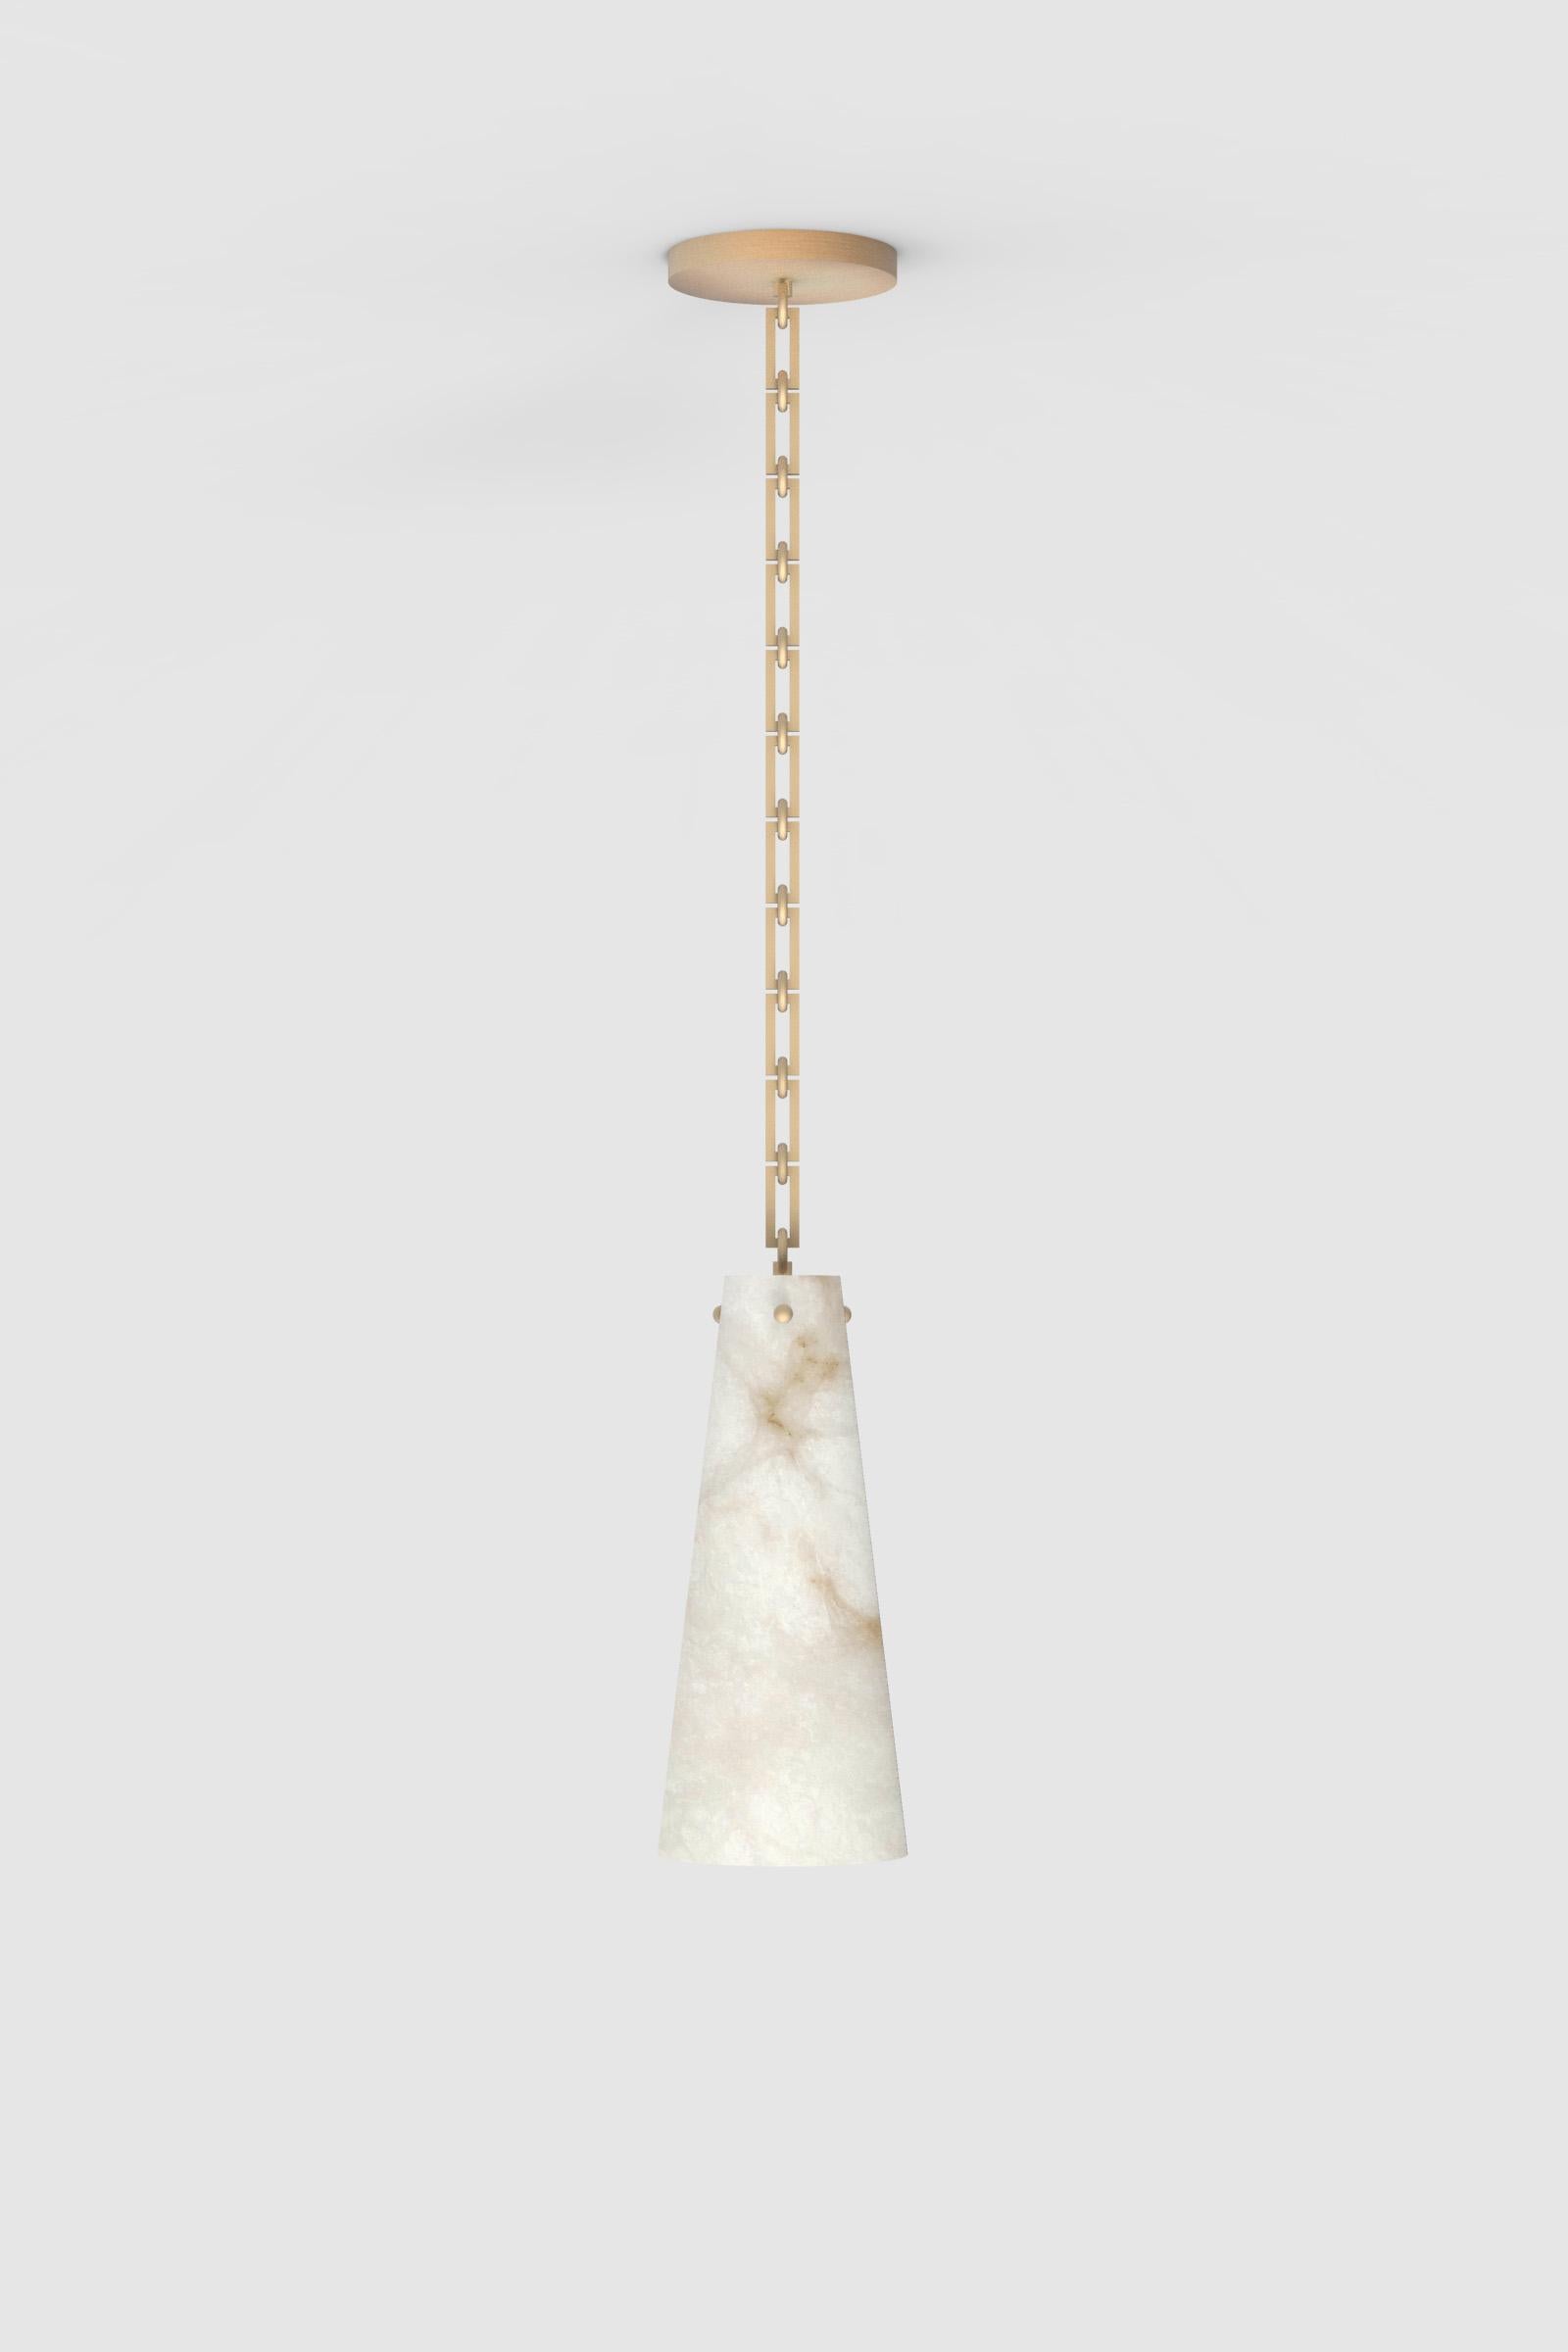 Post-Modern Contemporary Lucca Pendant 202A in Alabaster by Orphan Work, 2021 For Sale